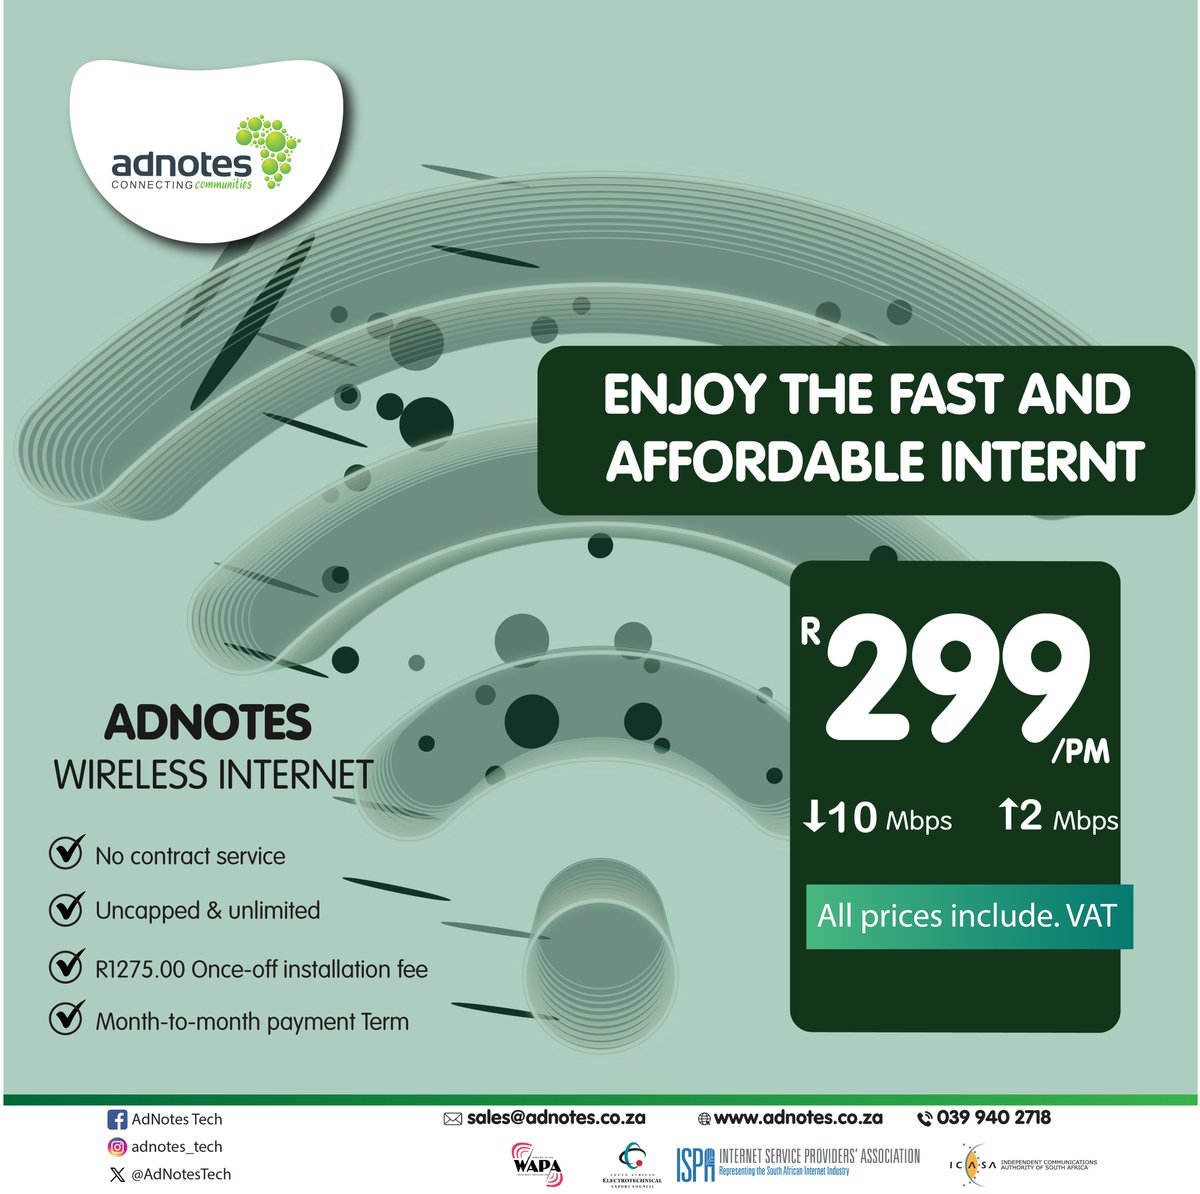 Experience Unlimited Streaming with Fast, Affordable, and Reliable Internet from adnotes.co.za - No Contracts, Just Seamless Connectivity! SIGN UP TODAY! #UNLIMITED #UNCAPPED #NOCONTRACT #WIFI @AdNotes